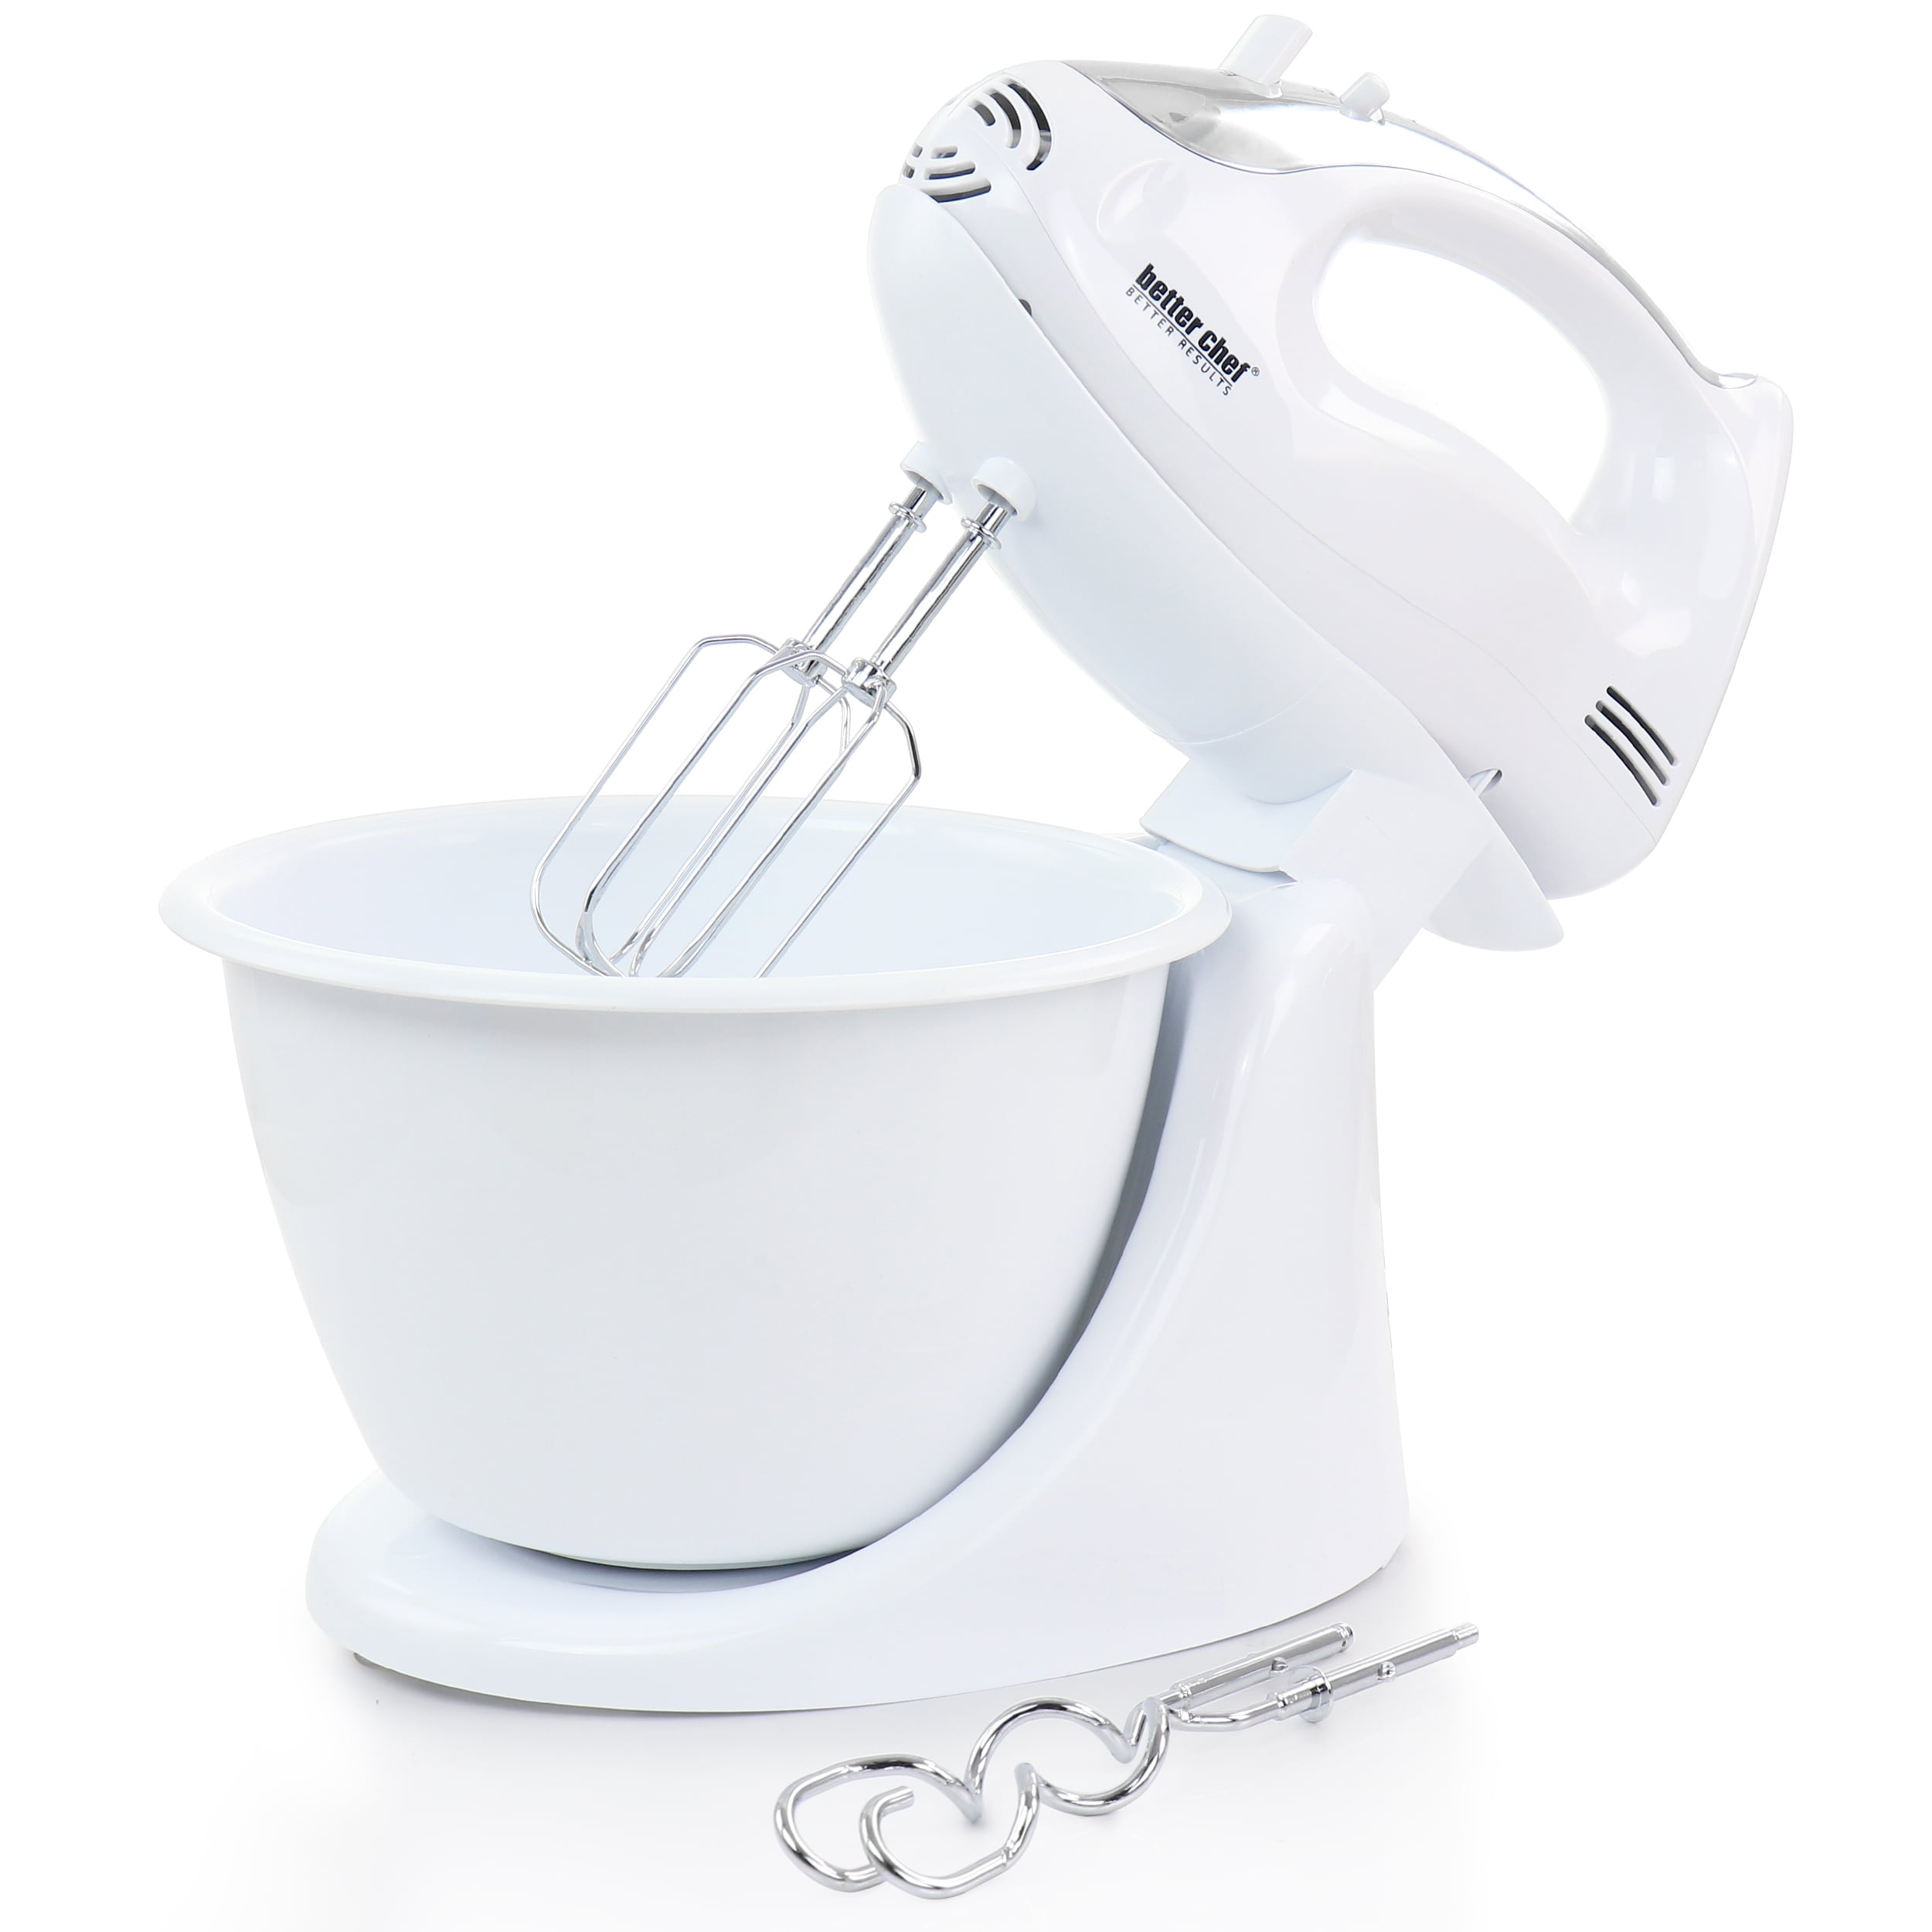 Powerful Wireless Hand Mixer For Effortless Baking And Cooking